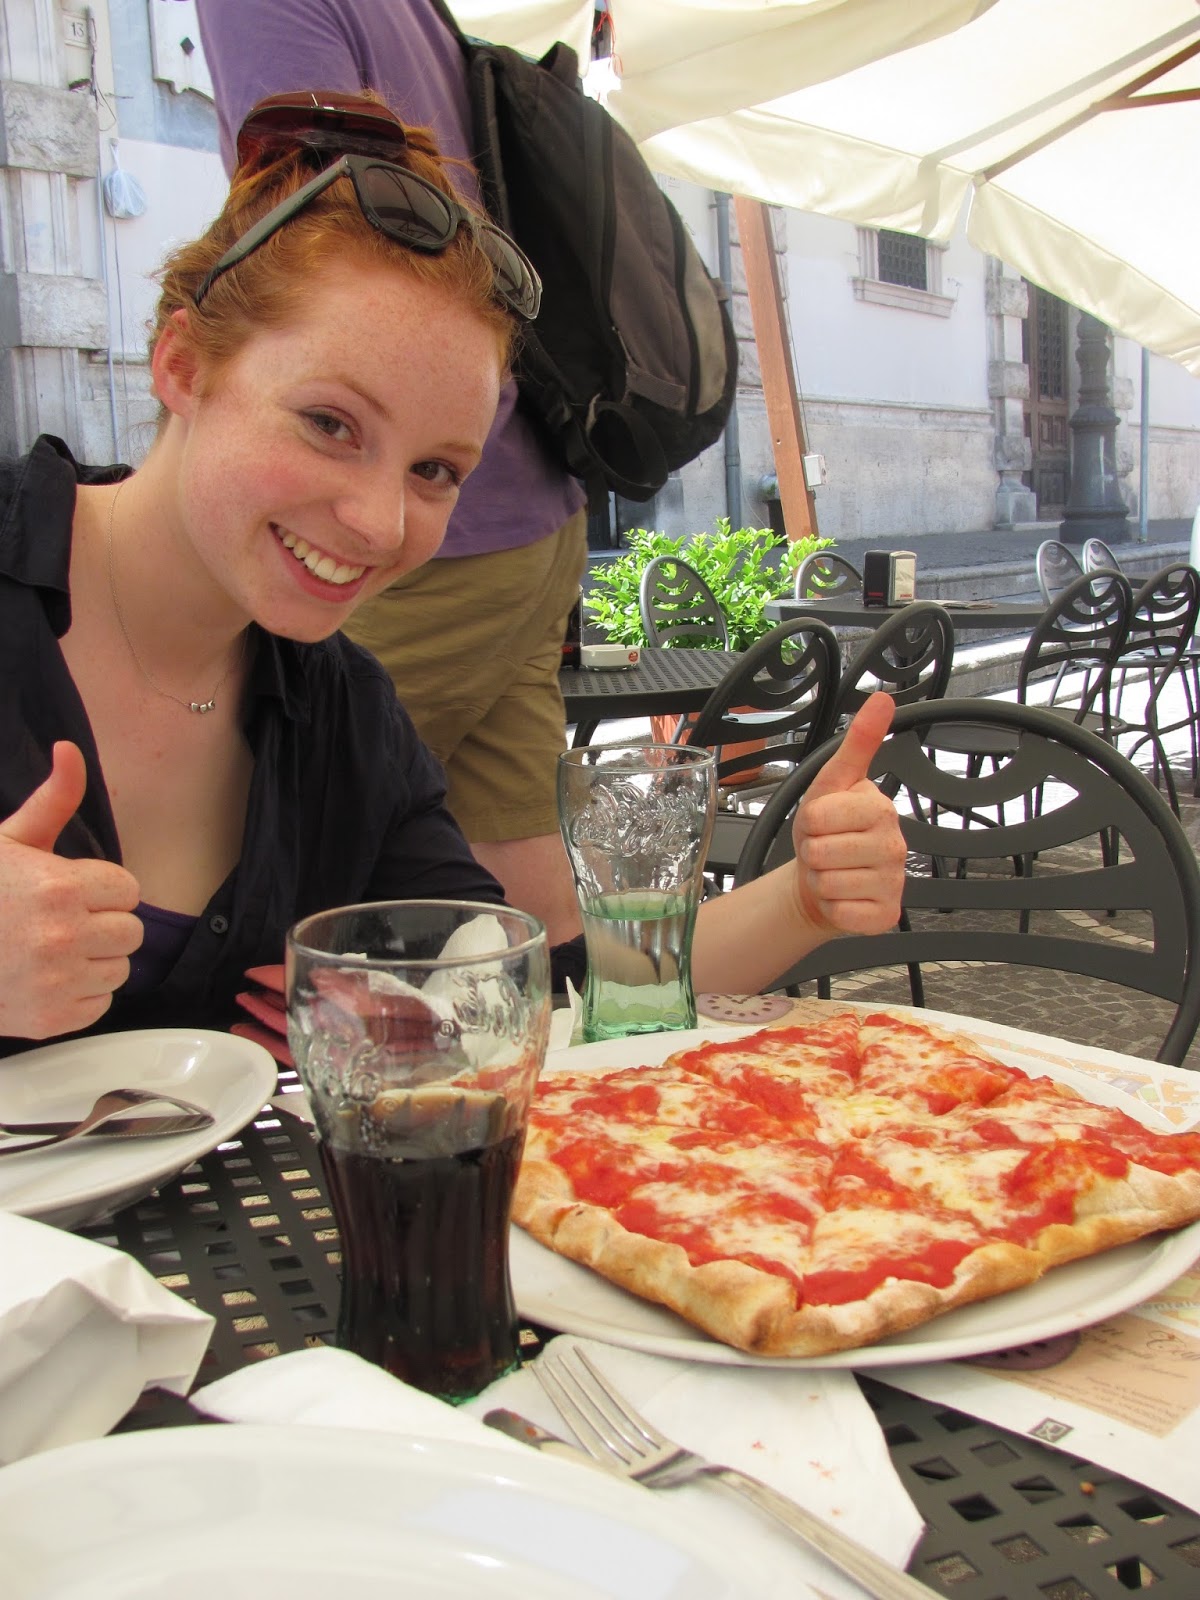 A young woman gives 2 thumbs up to a square pizza pie.